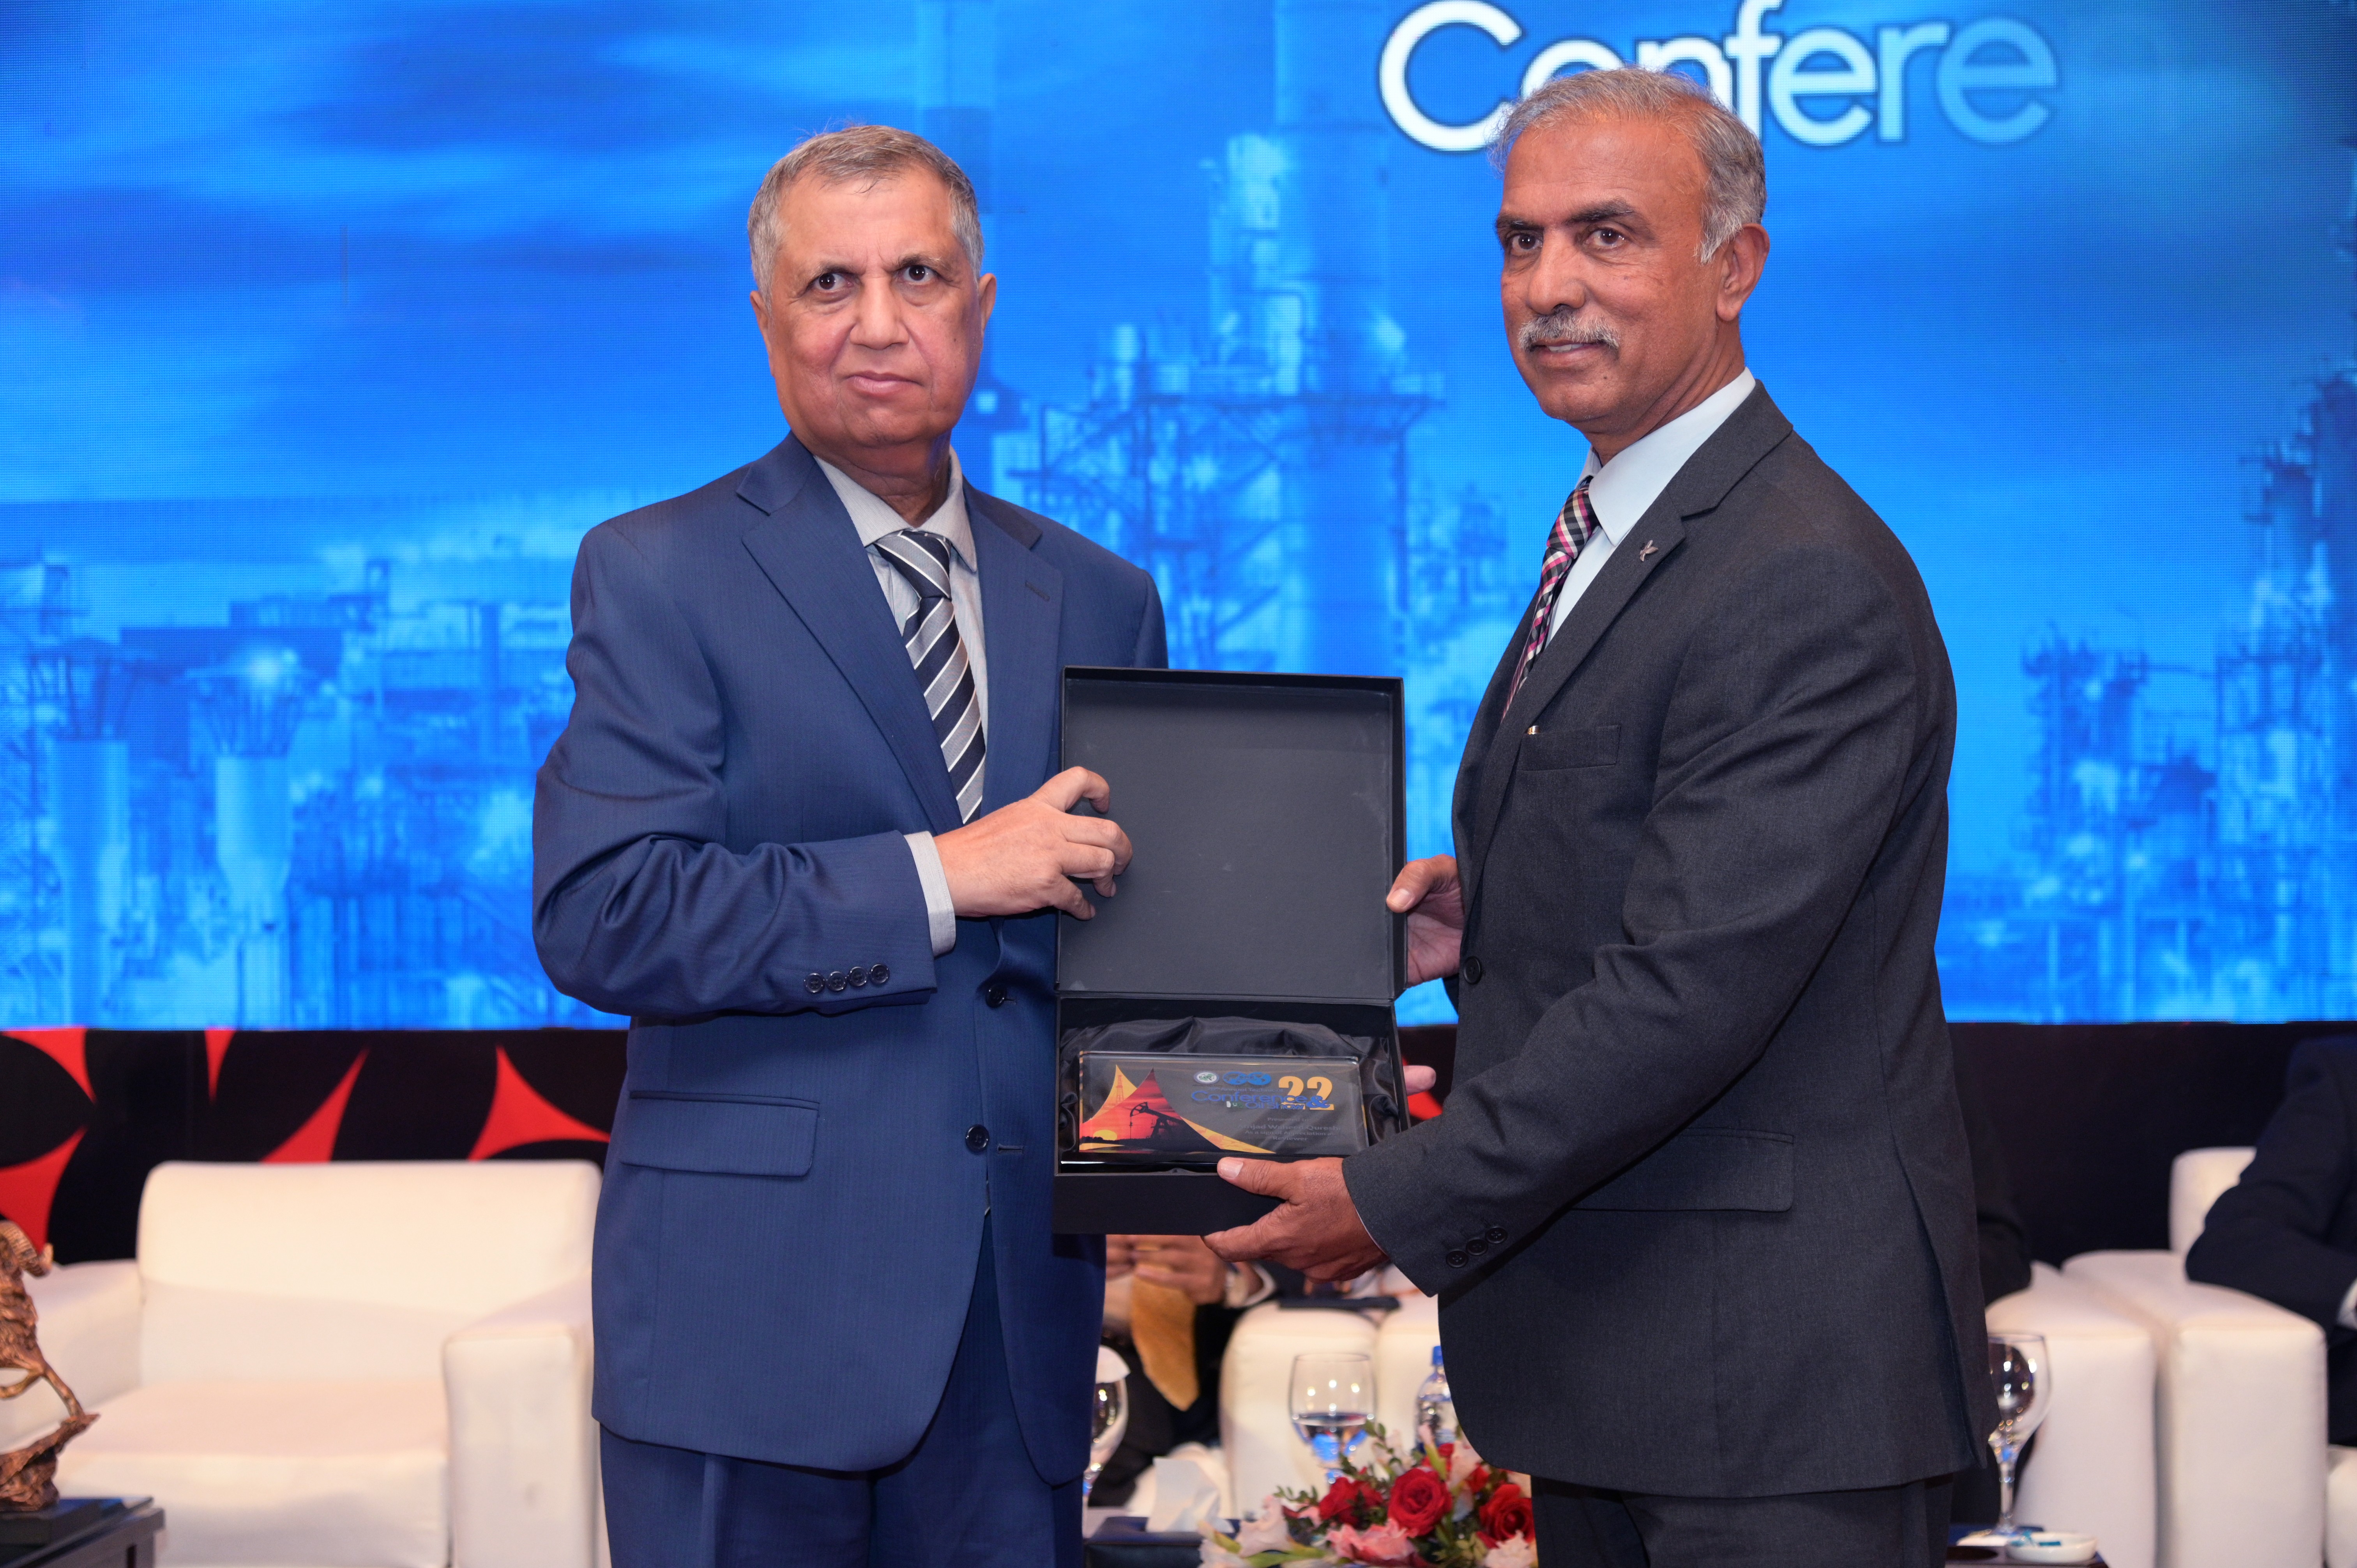 Shields distribution ceremony to the participants at the event of conference and oil show as a sign of appreciation